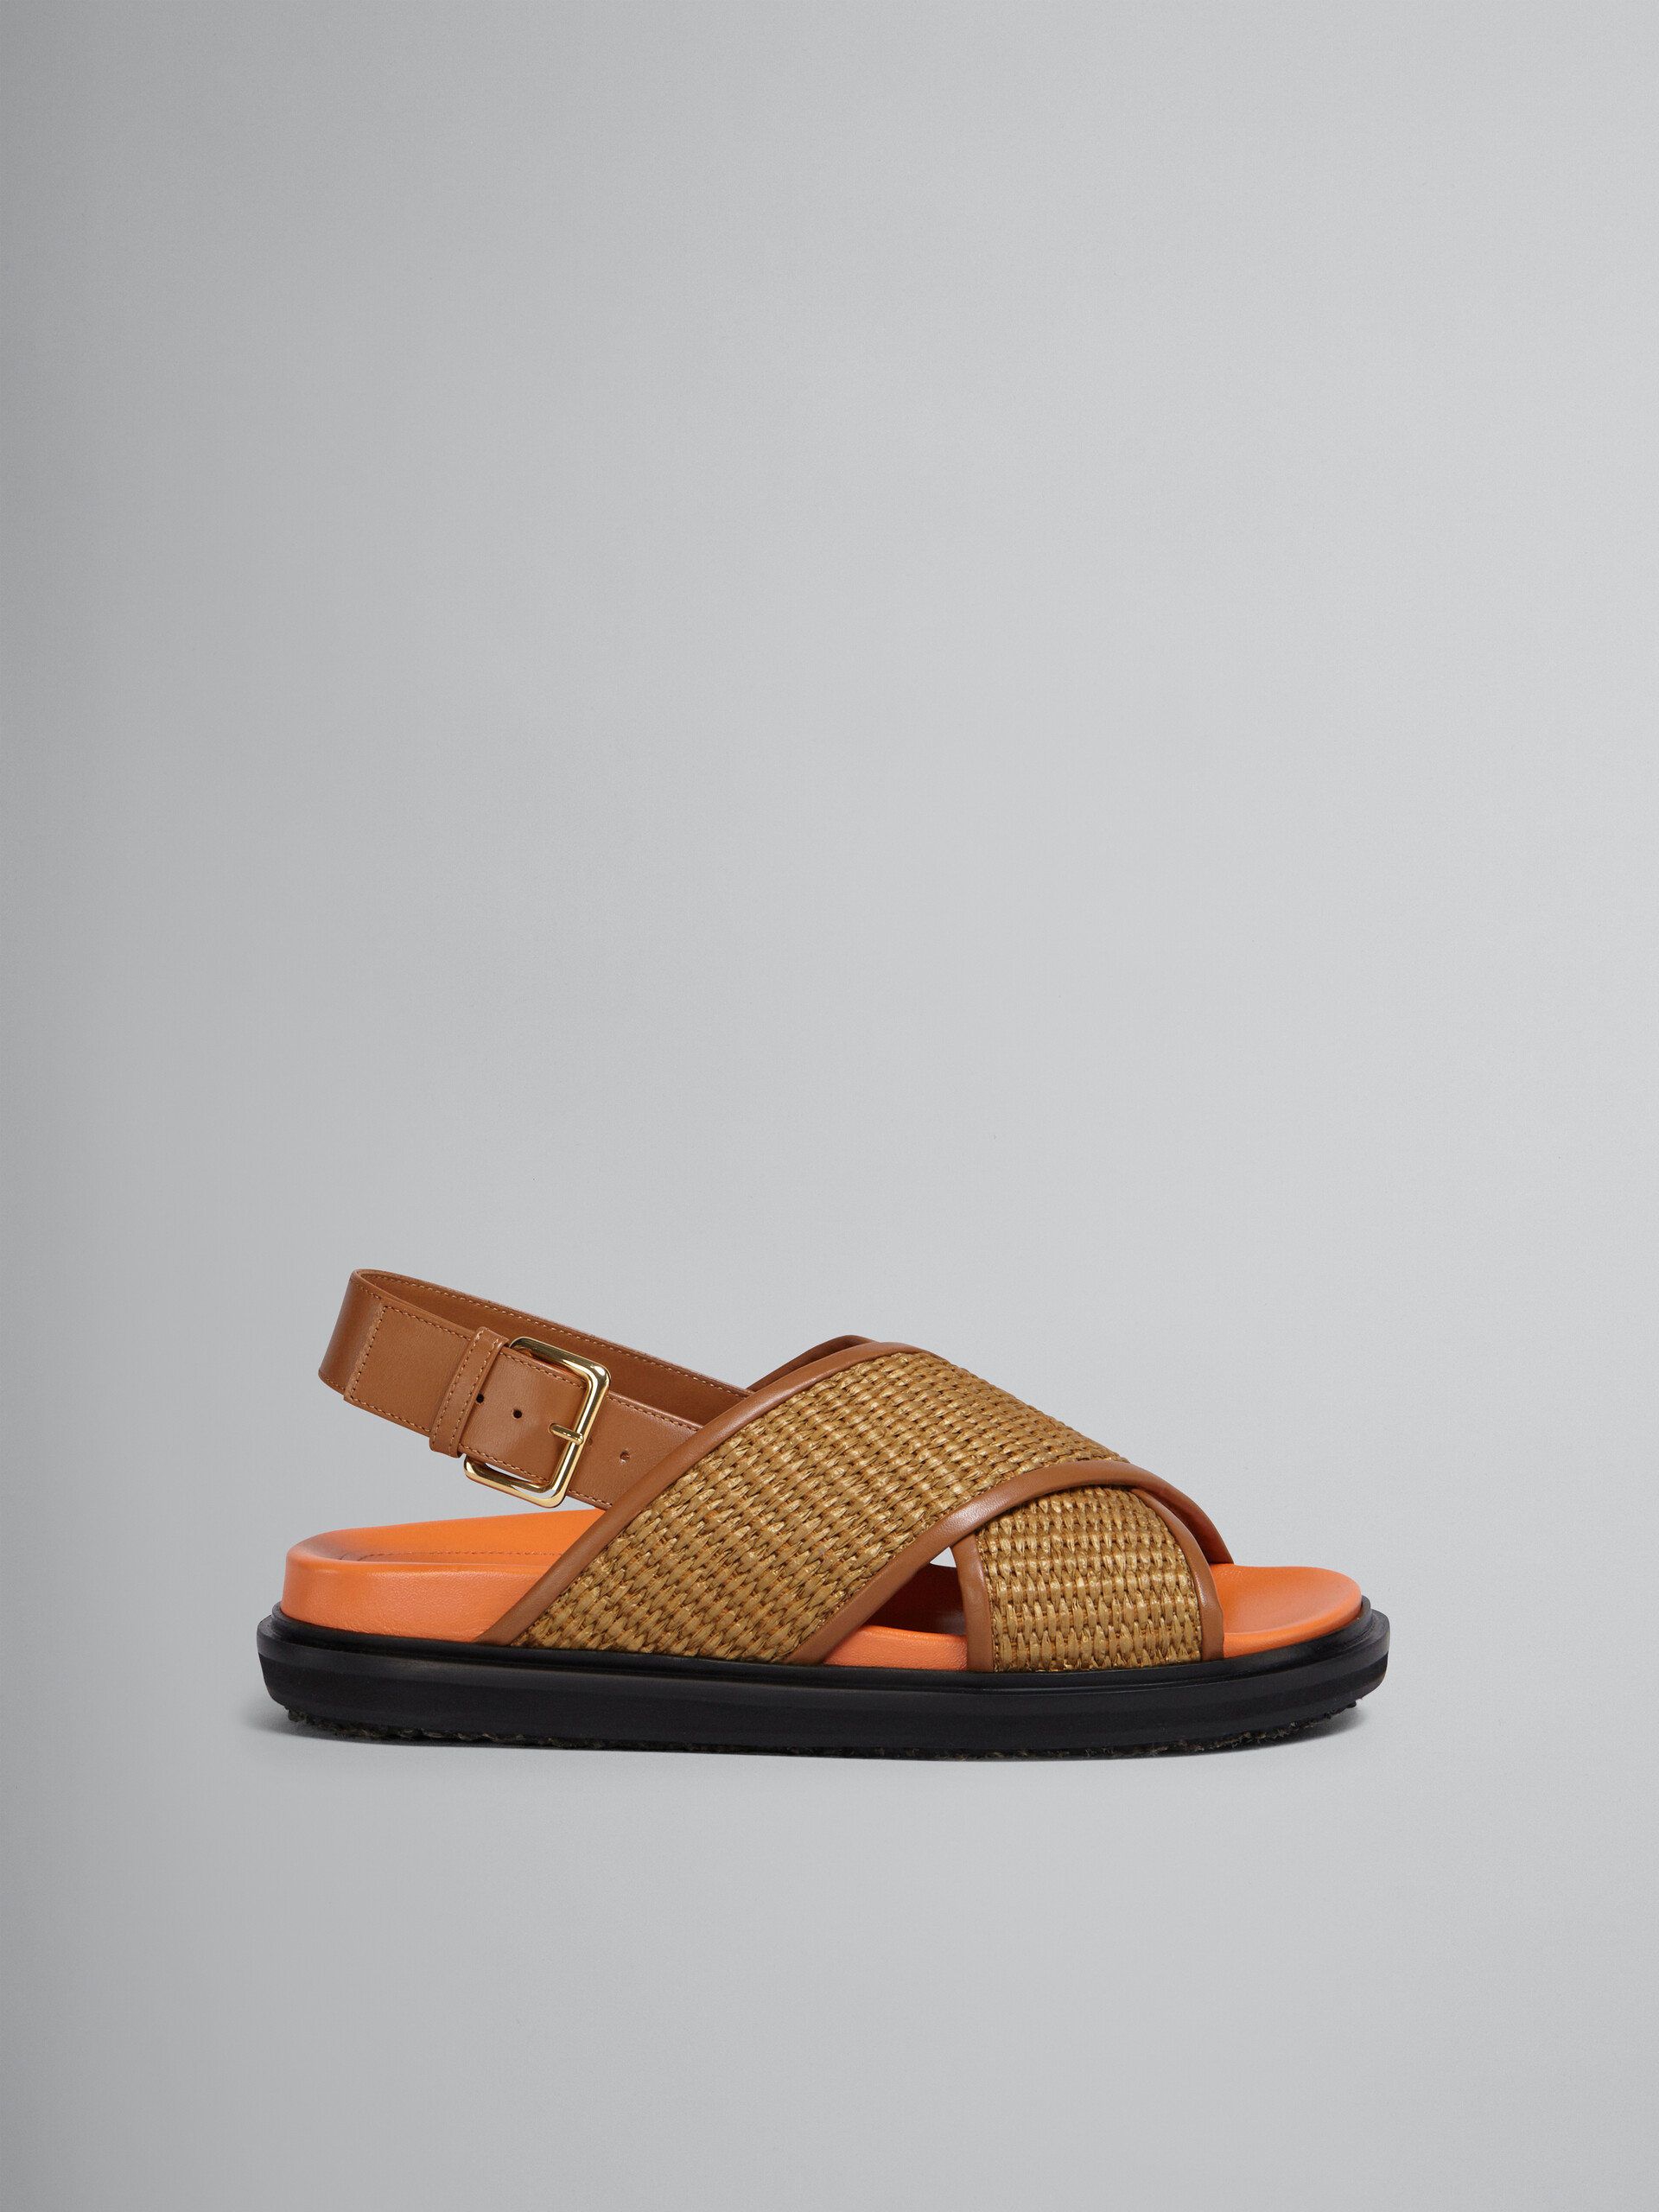 Brown raffia and leather fussbett - Sandals - Image 1